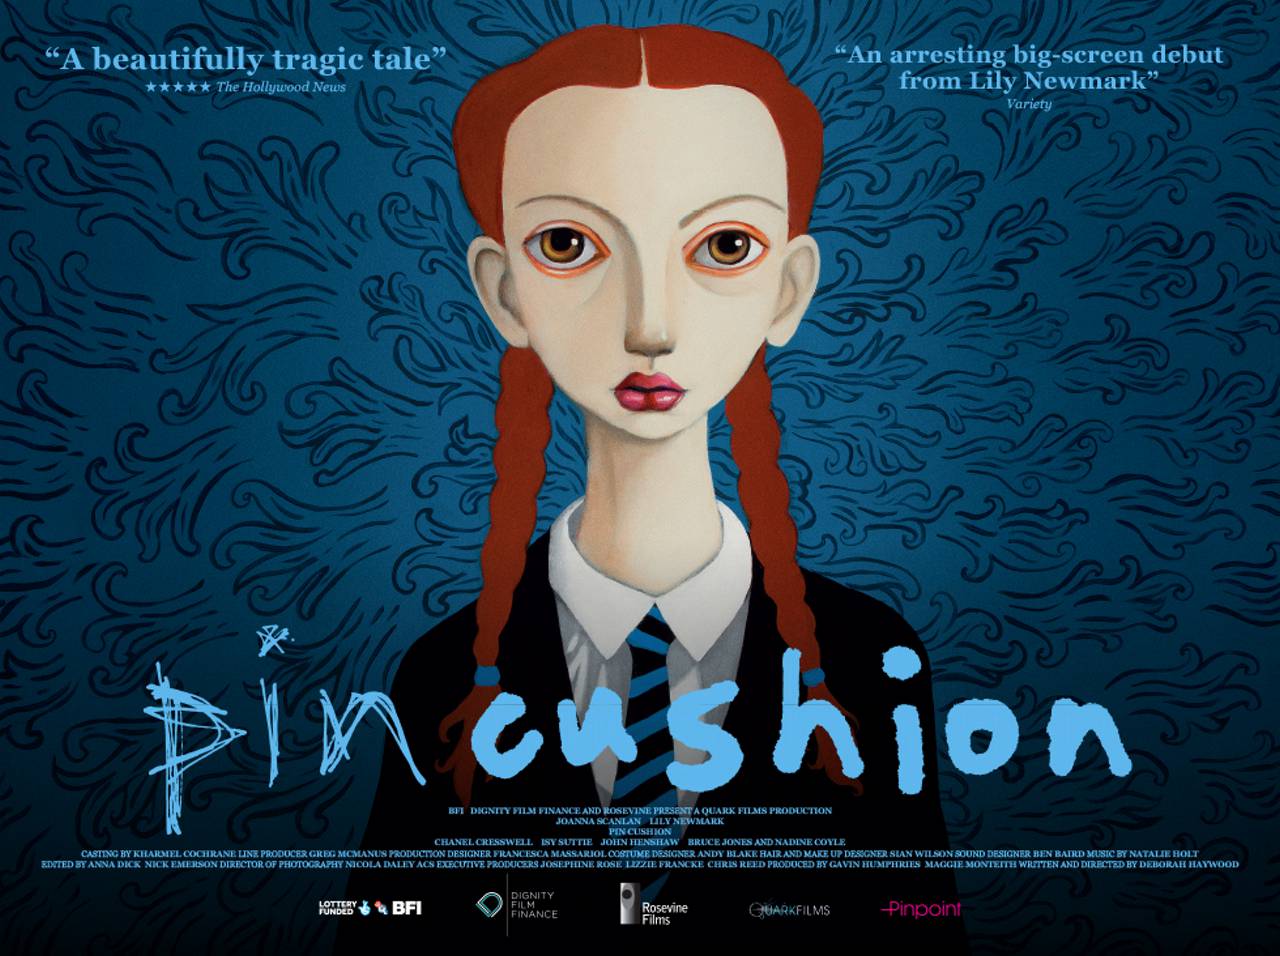 Check out “Pin Cushion” quirky new movie!